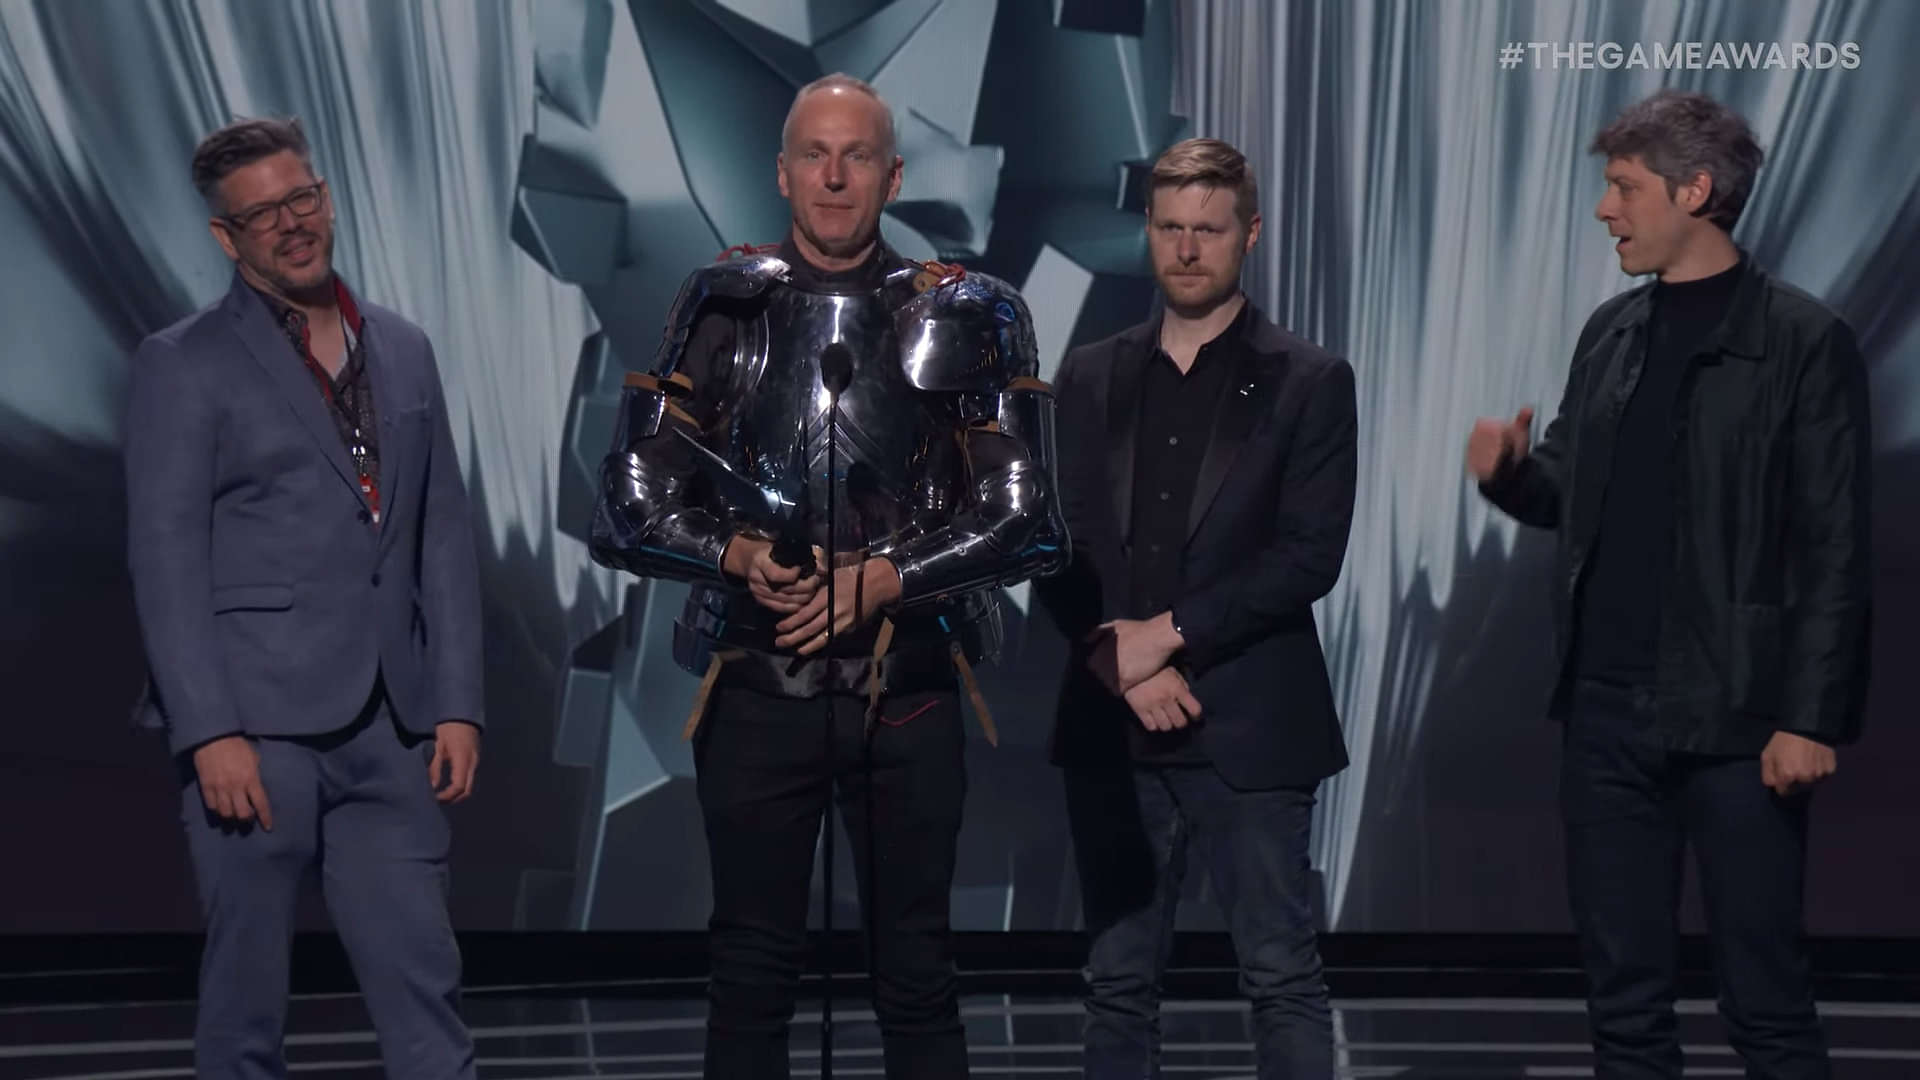 The Game Awards 2023 Turns Out A Dry Year for PlayStation Games